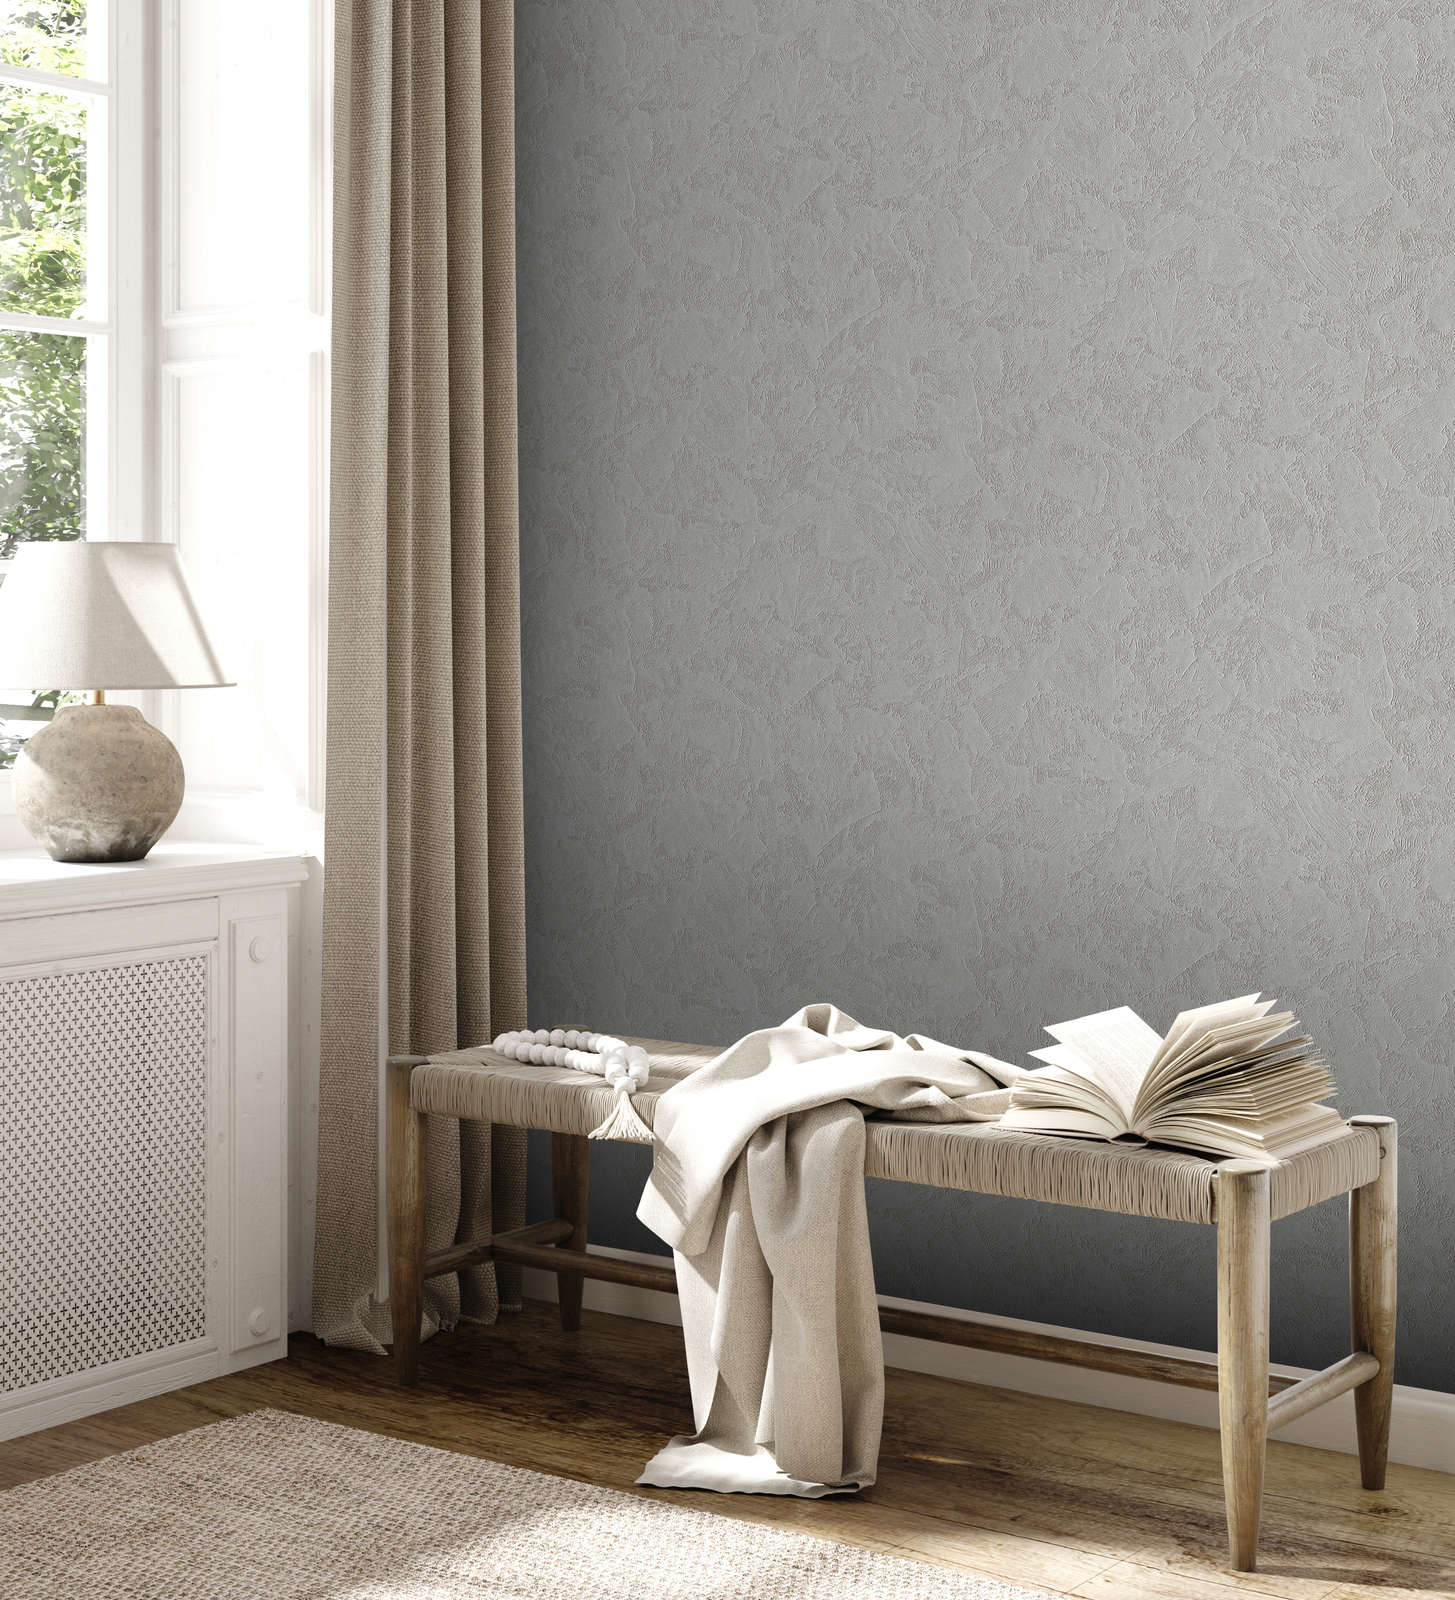             Plain textured wallpaper in plaster look with glitter effect - grey, silver
        